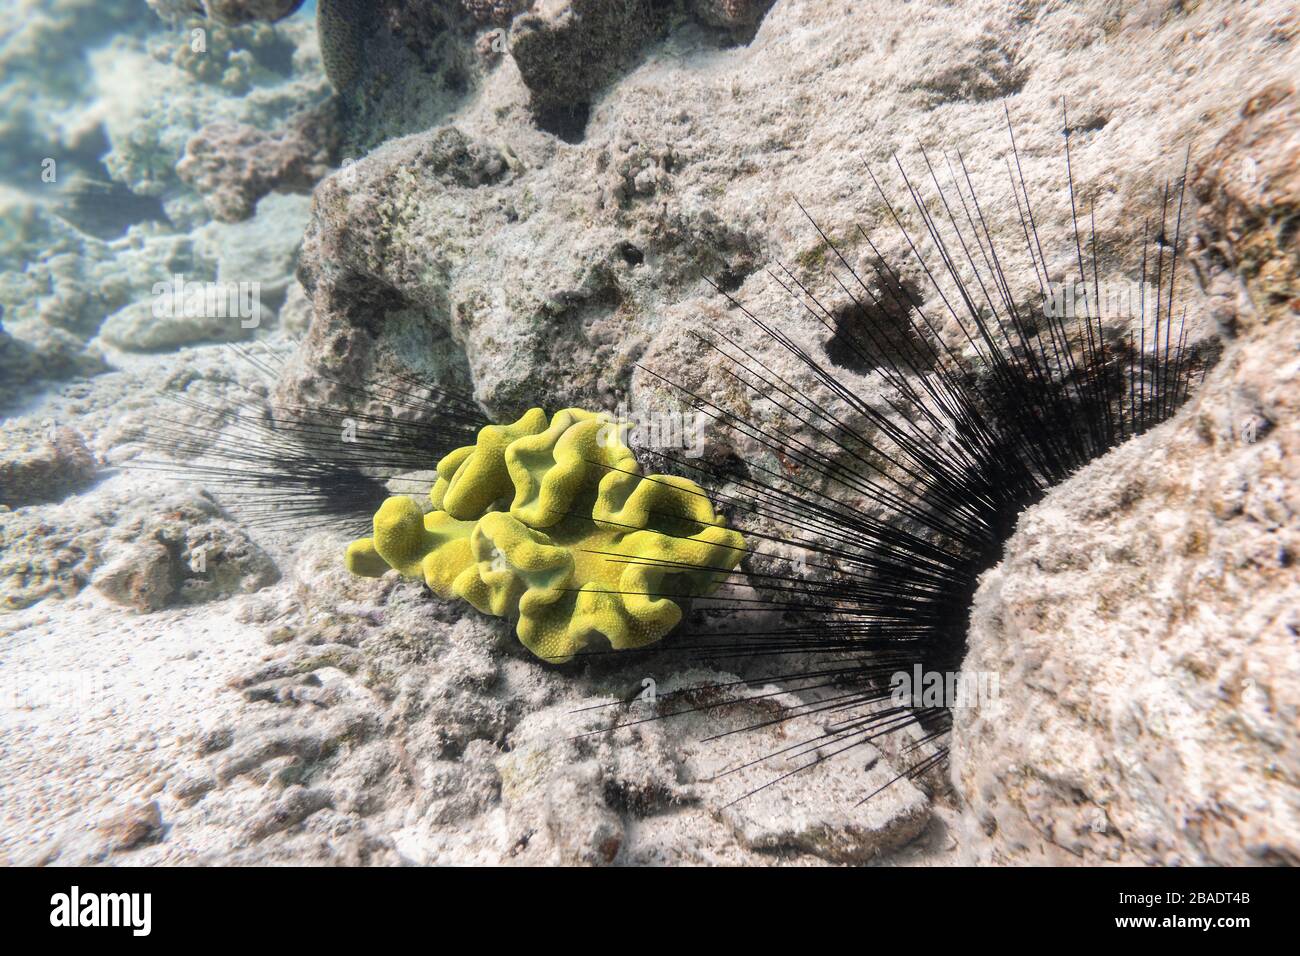 Long Spined Sea Urchin (Diadema Setosum) Hiden In The Sandy Seabed And Bright Green Sponge Near Coral Reef. Dangerous Underwater Animal With Black Poi Stock Photo